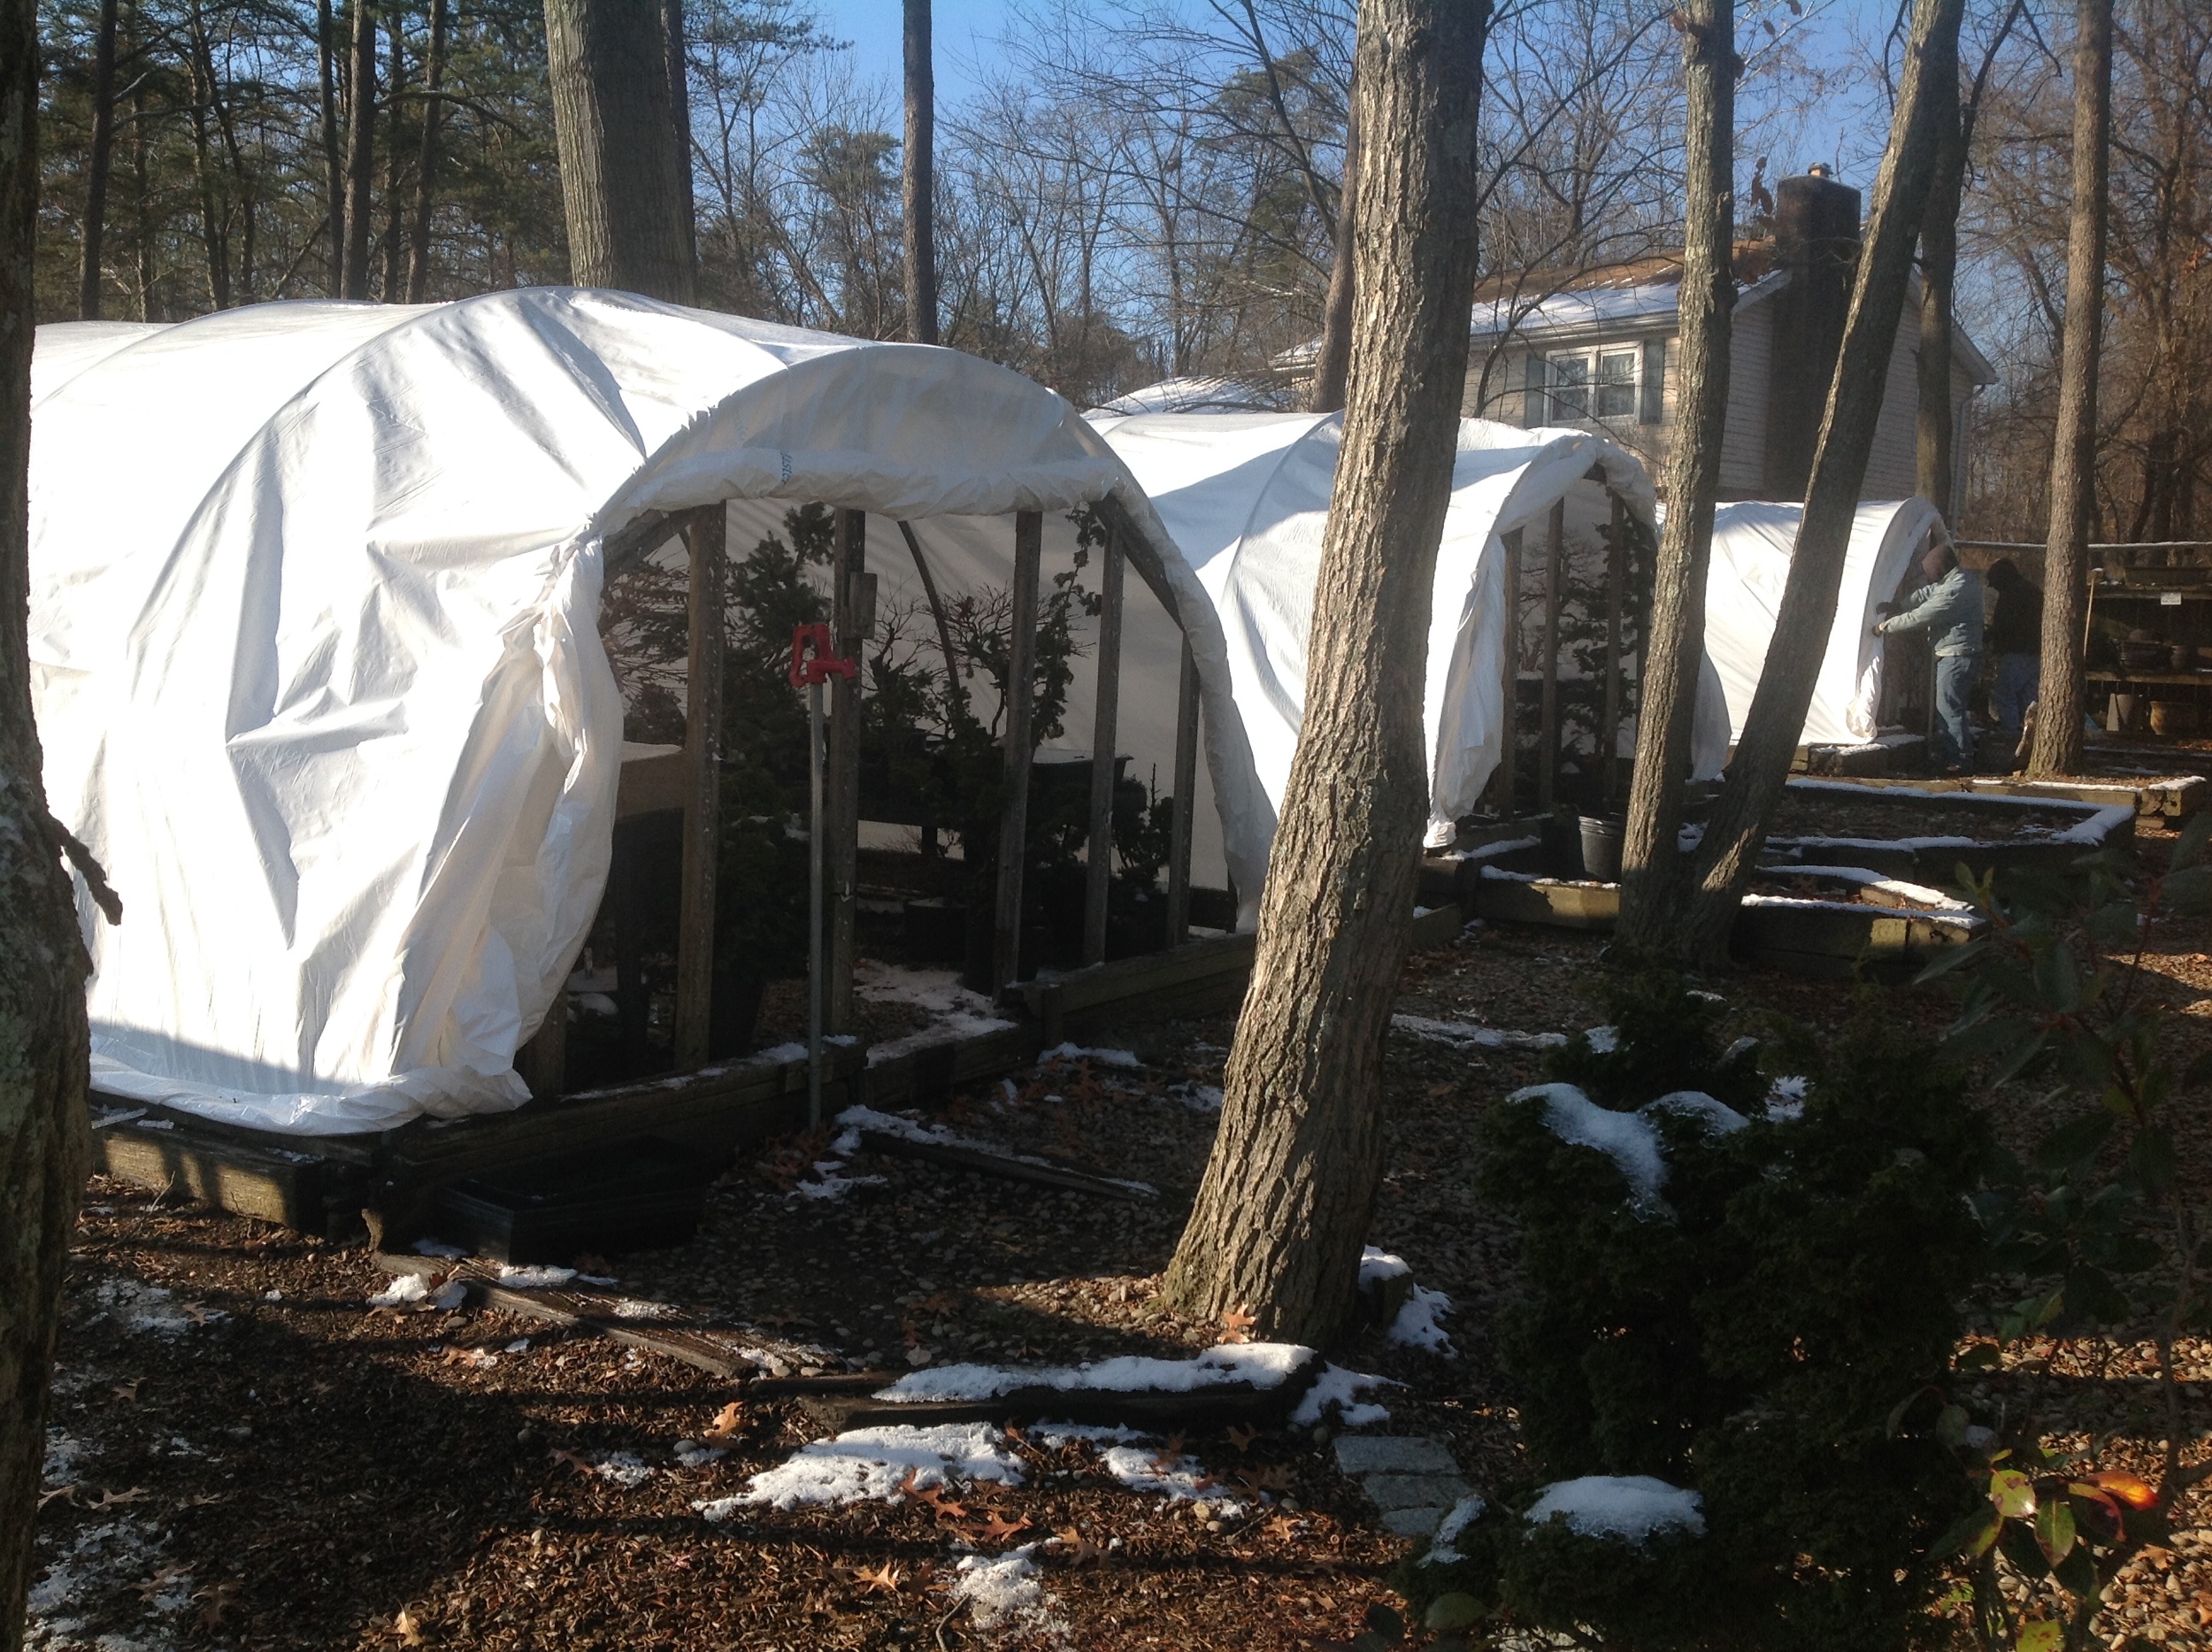  The hoop houses&nbsp;prepped for winter weather. 